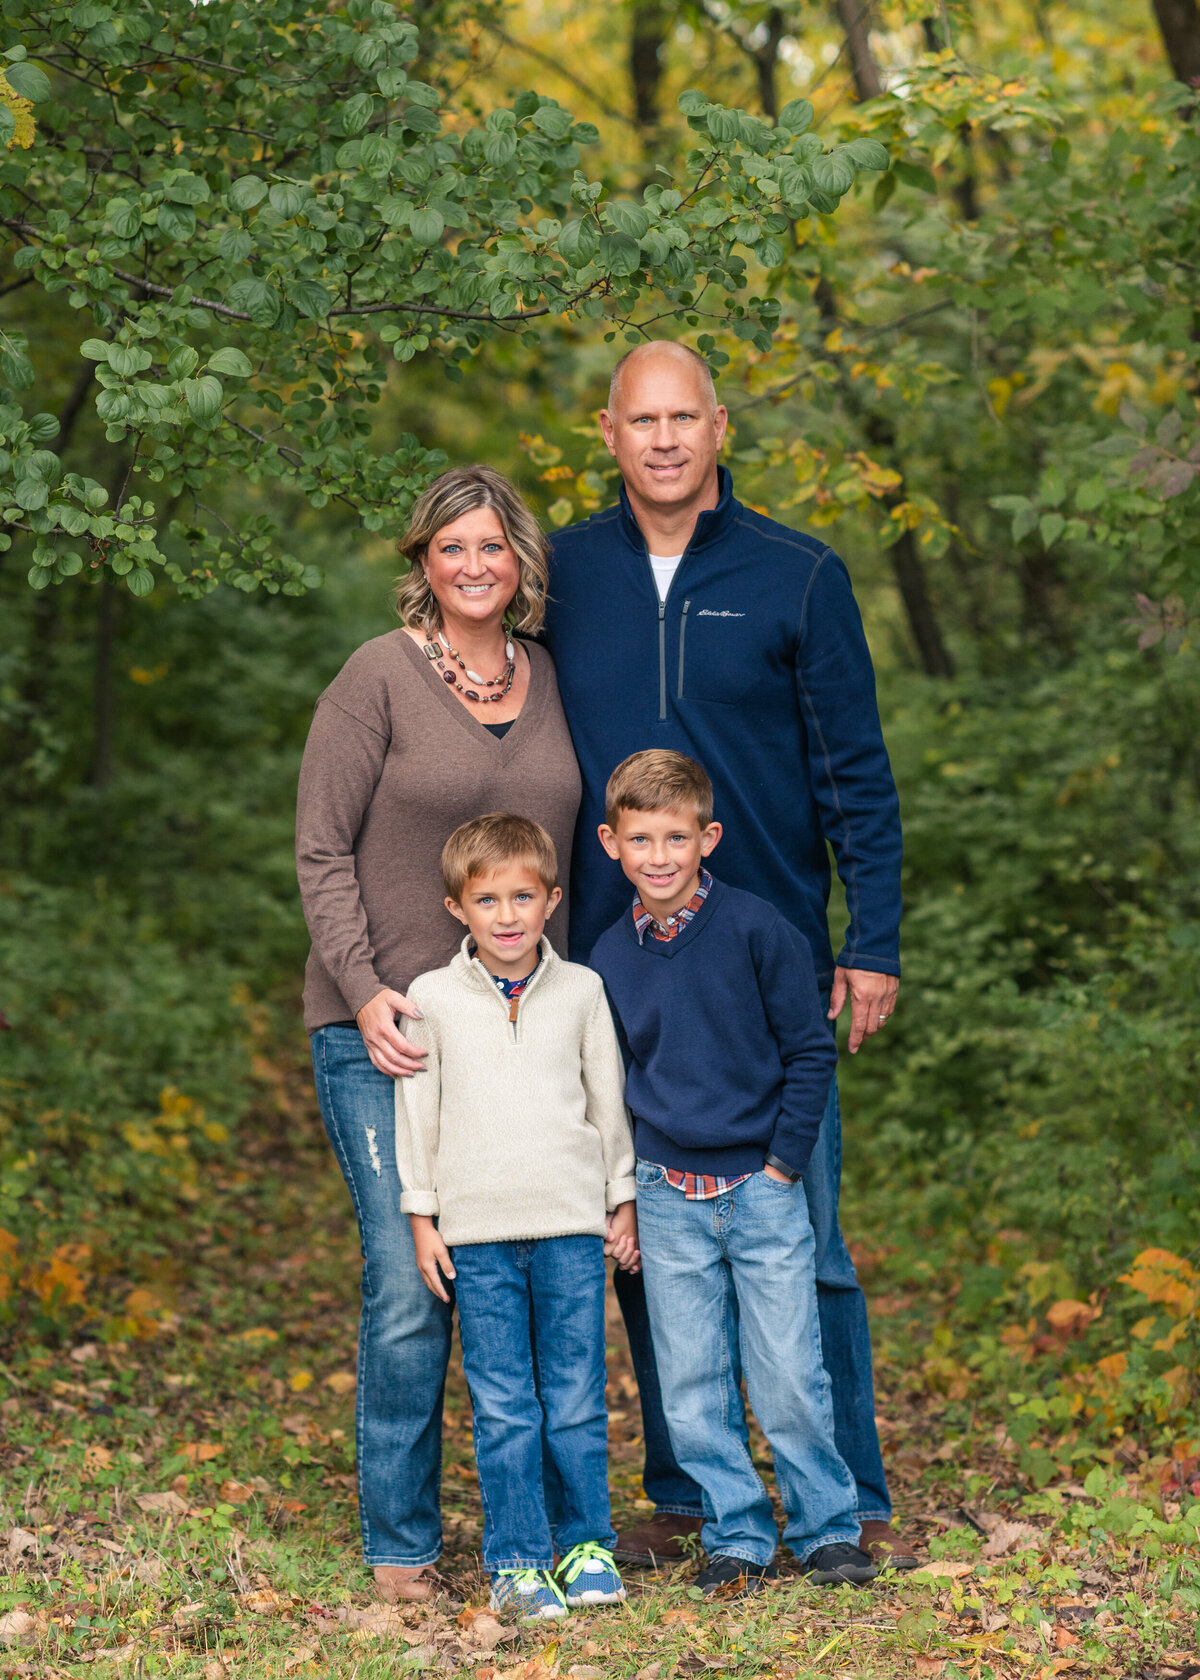 Des-Moines-Iowa-Family-Photographer-Theresa-Schumacher-Photography-Fall-Park-Standing